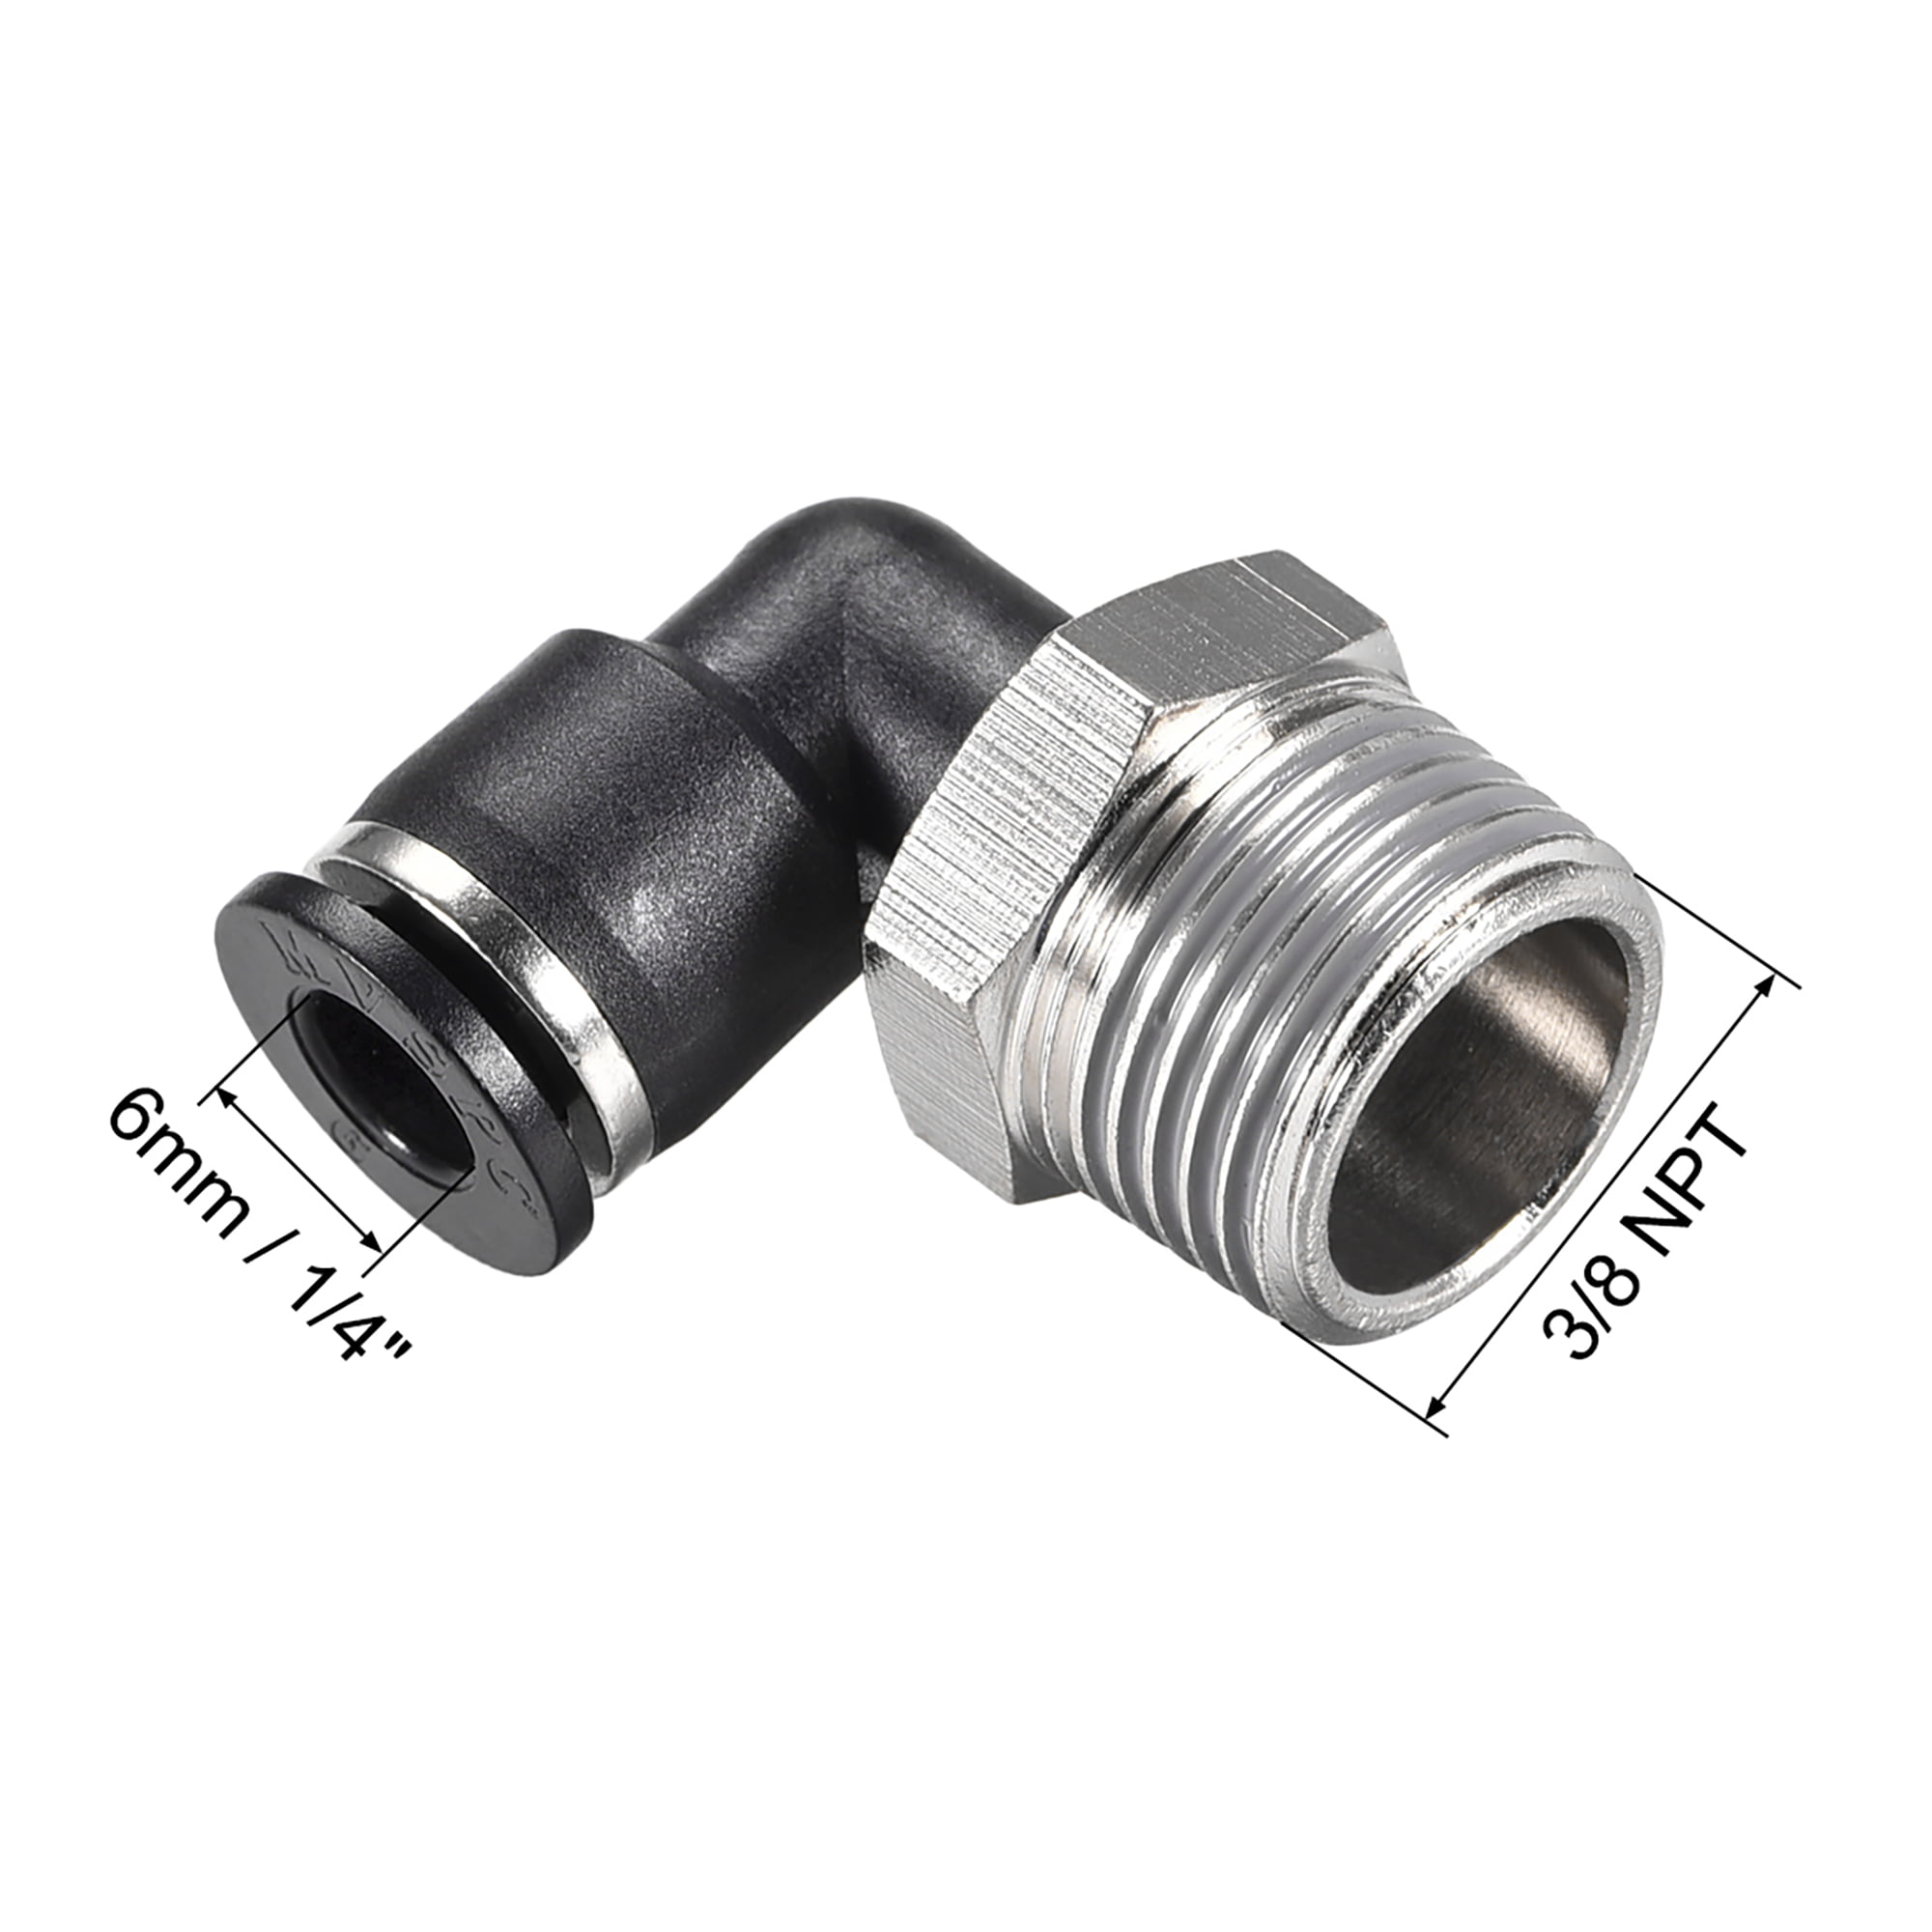 Pneumatic Mini Male Thread x Push-on Fittings Elbow Quick Adapter for Tube Hose 